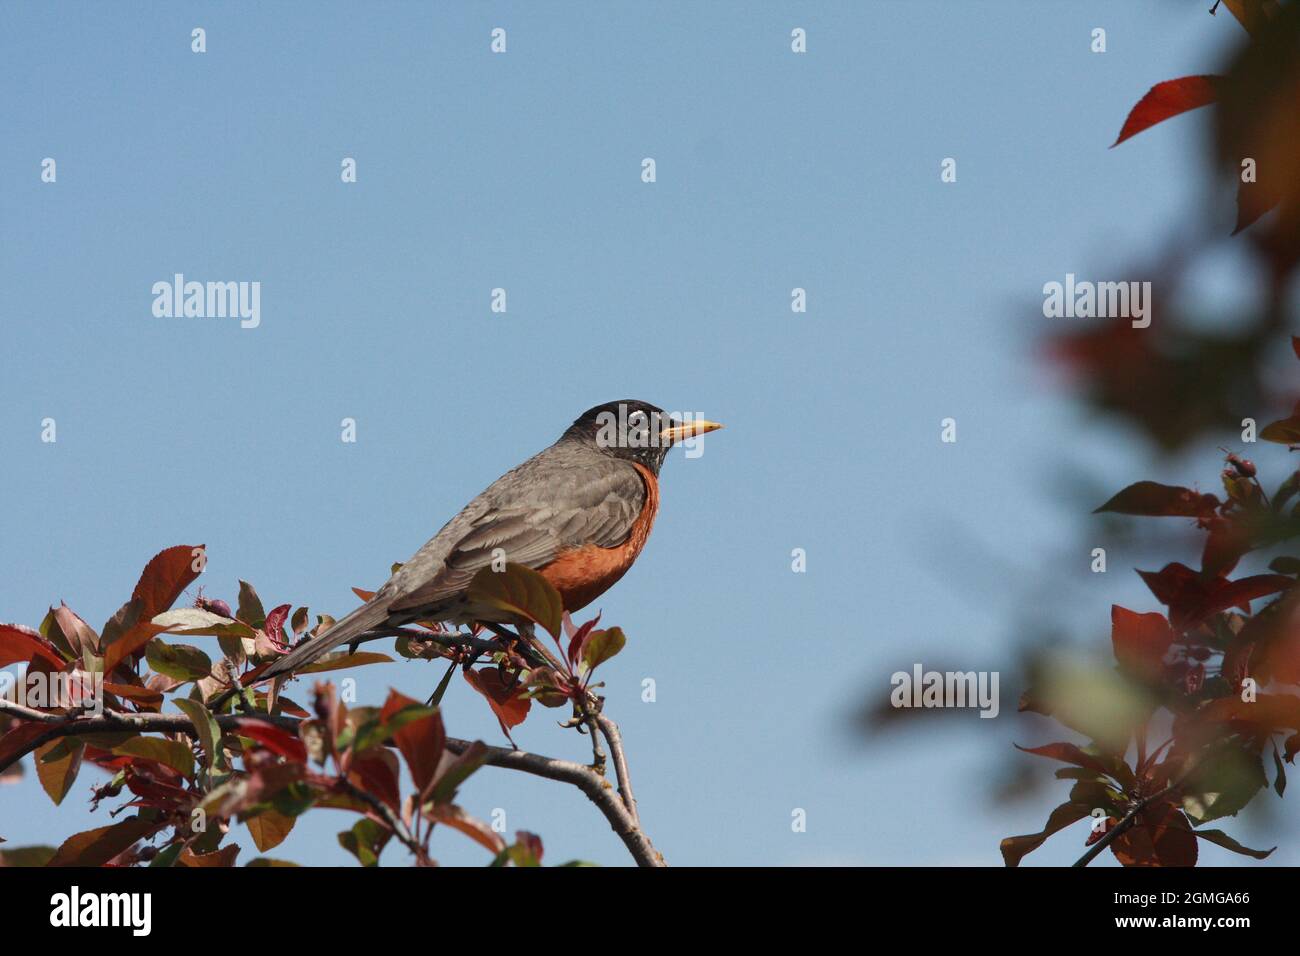 A handsome American Robin perches on a branch with a clear blue sky in the background. Stock Photo